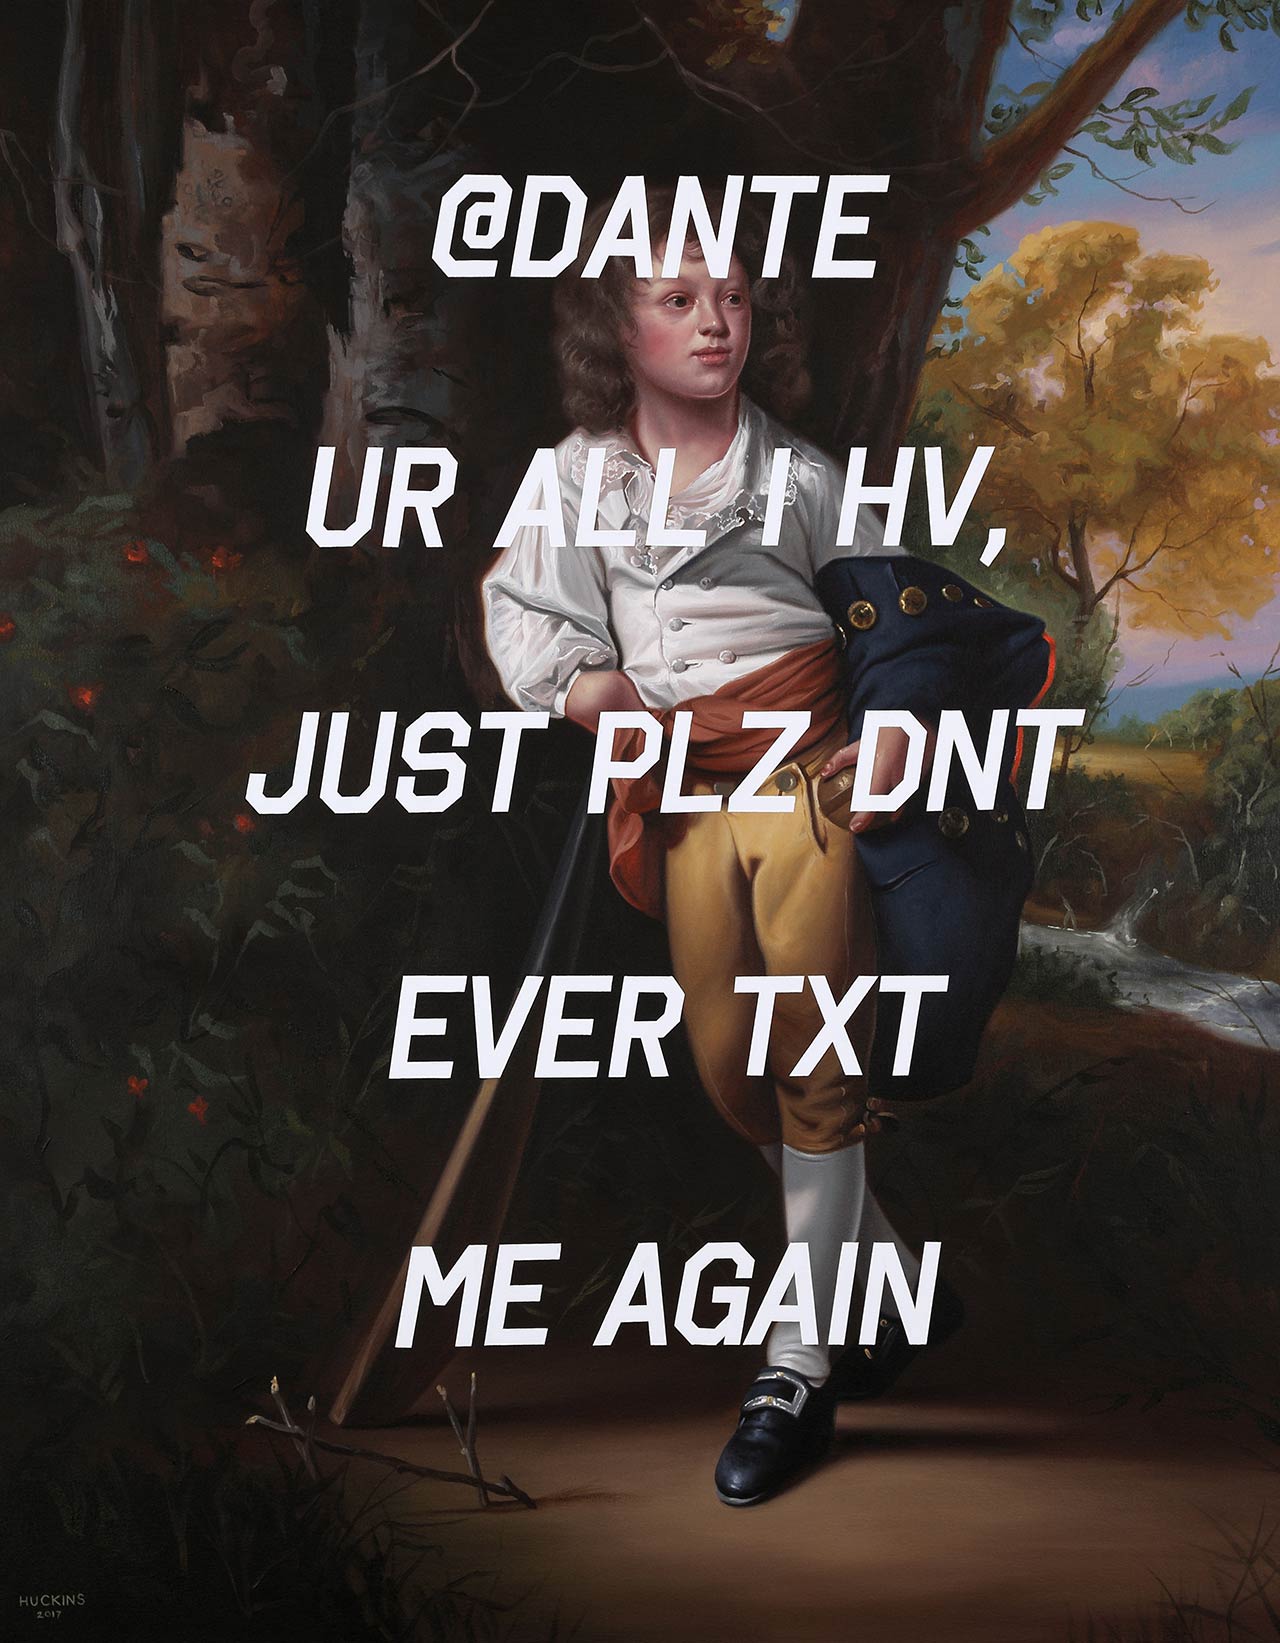 Shawn Huckins, Richard Heber: To Dante, You’re All I Have, Just Please Don't Ever Text Me Again, 2017. Acrylic on canvas, 40 x 32 in (102 x 81 cm).